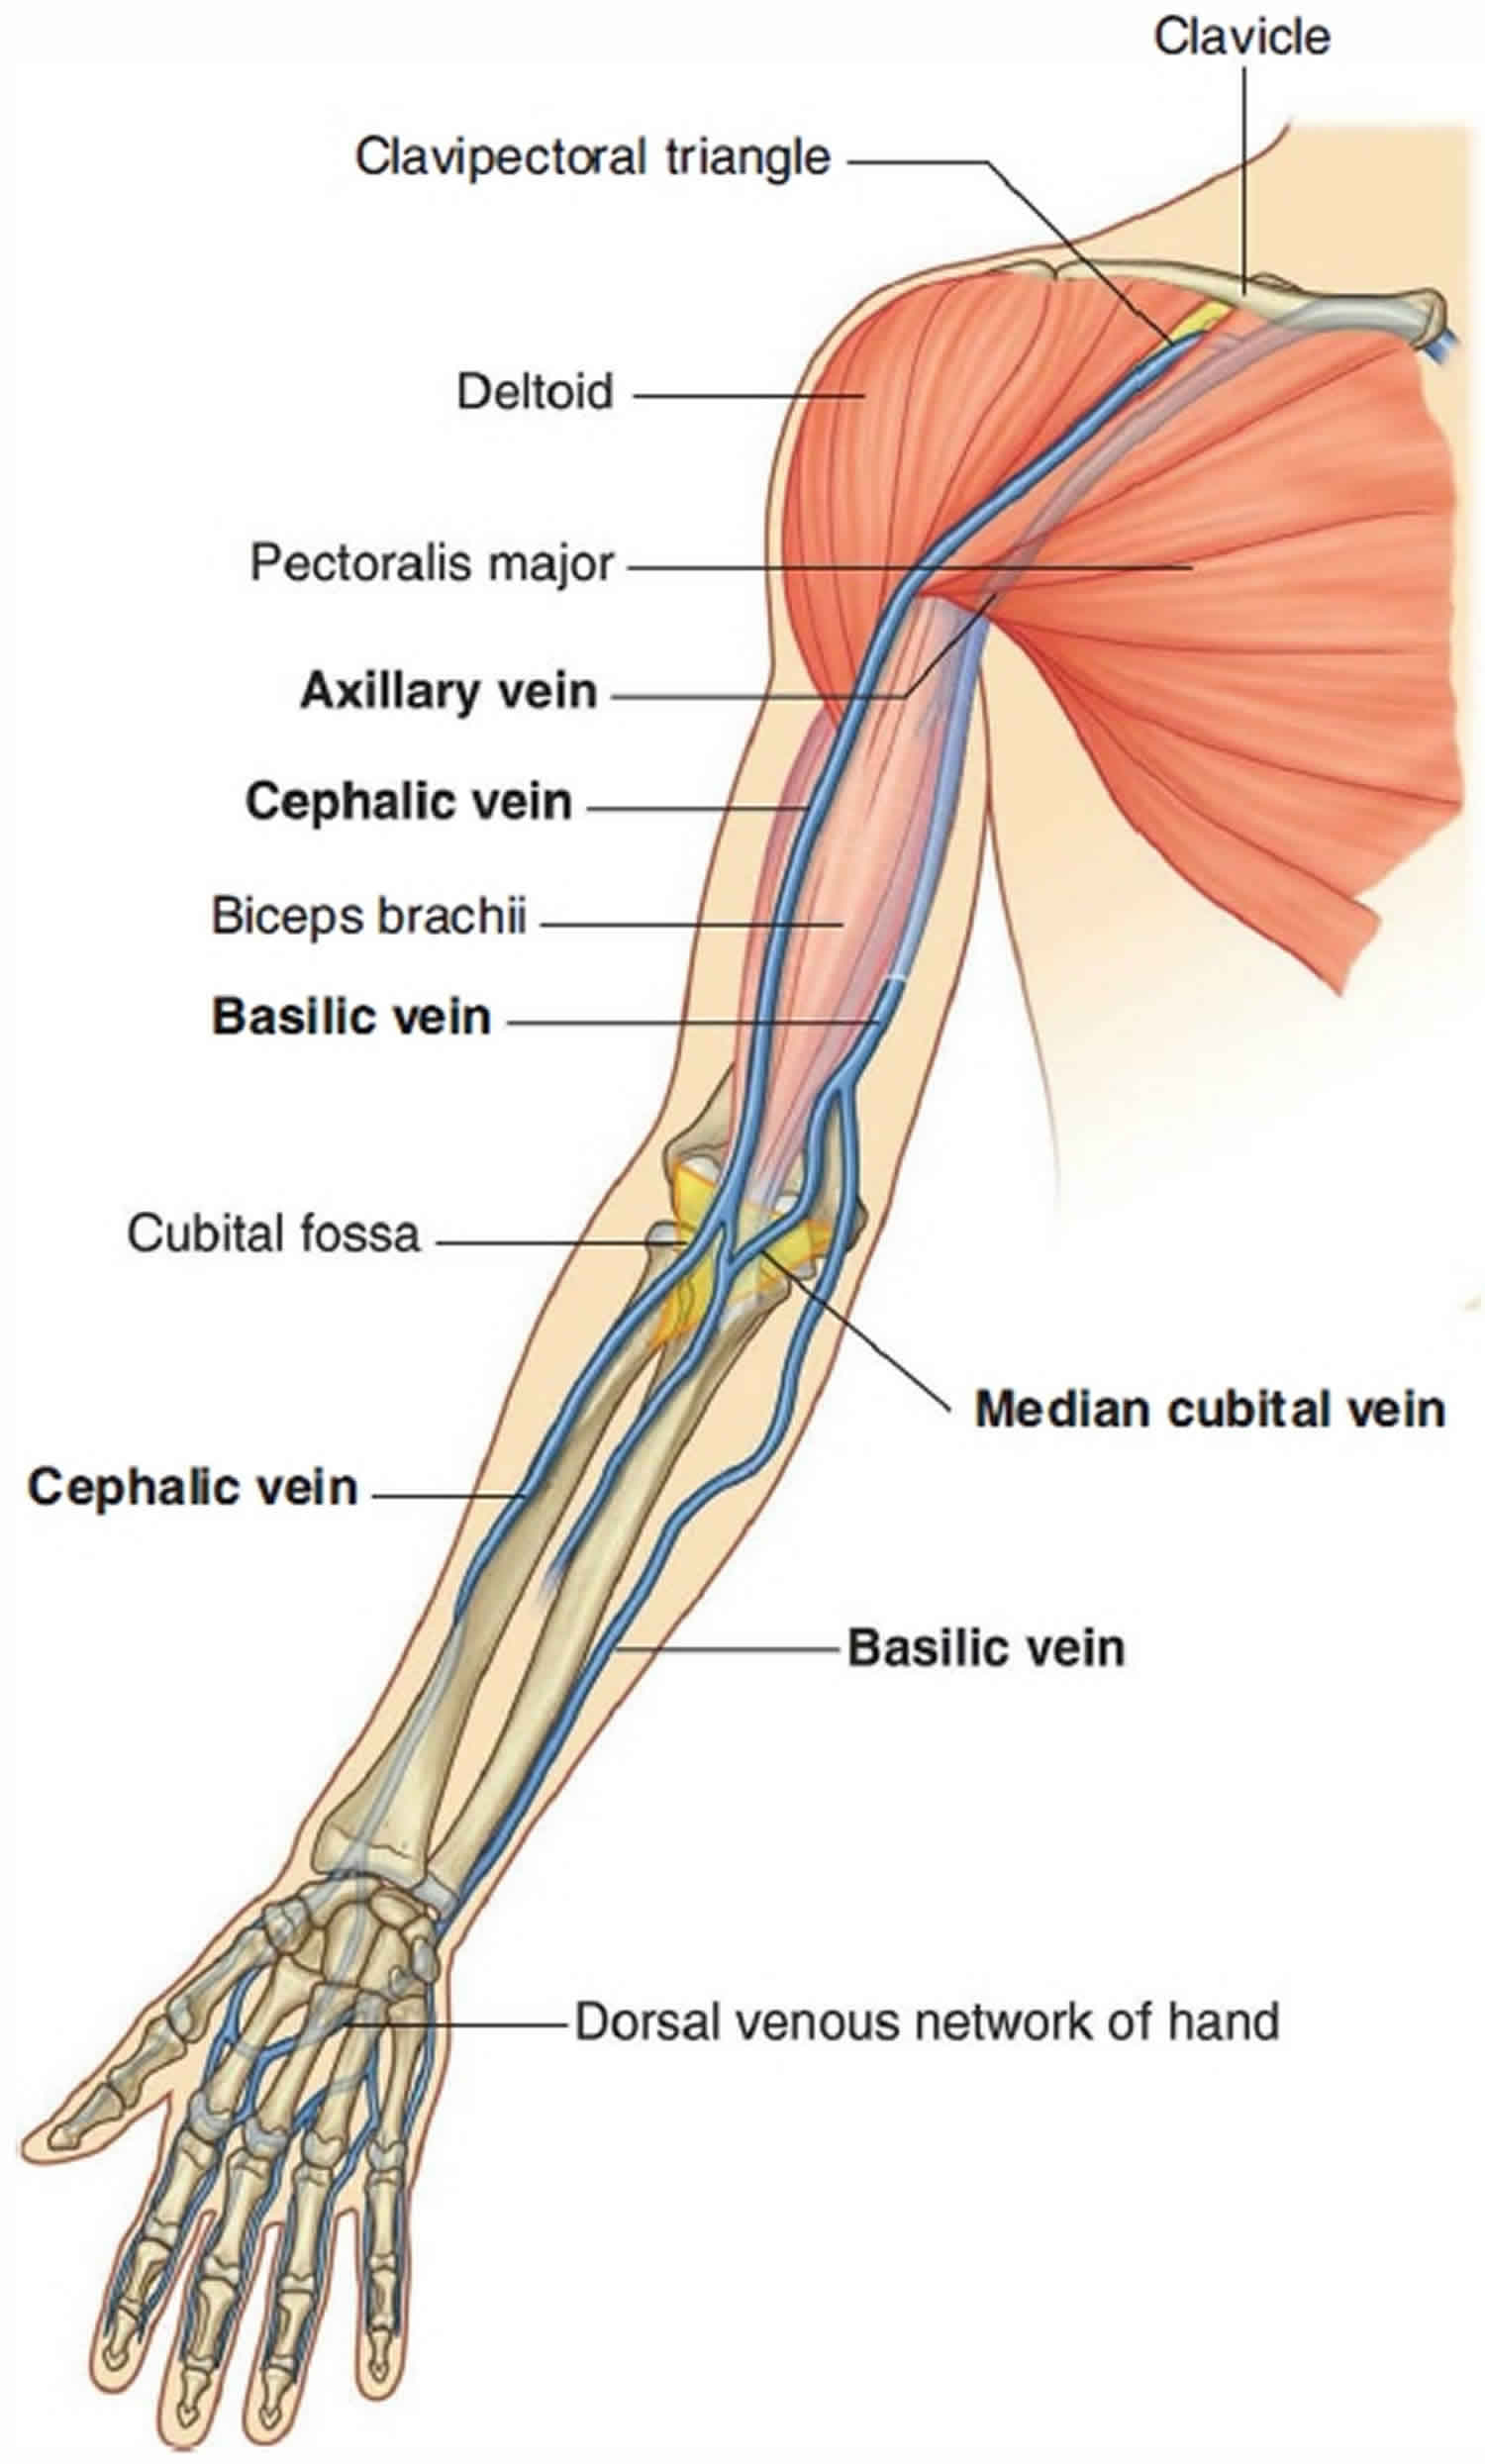 Veins of the arm for venipuncture